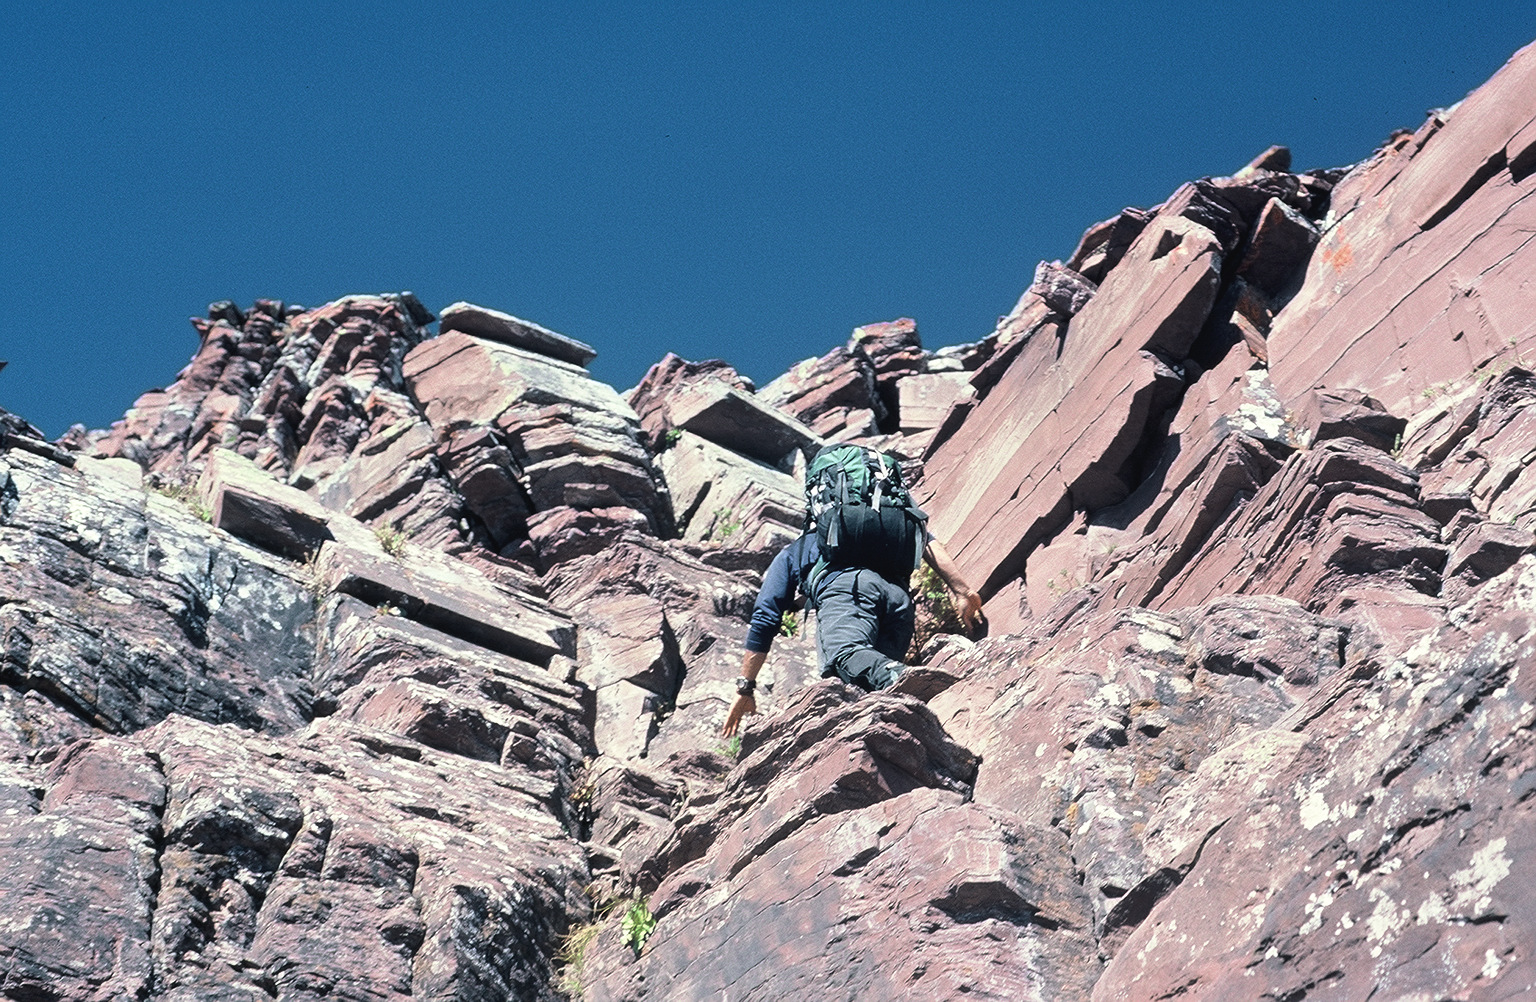 Climbing North Maroon Peak, one of the iconic Maroon Bells near Aspen, is more than a hike. It requires some rock scrambling, and helmets are suggested because of the potential for rock fall. (John Meyer/The Denver Post)